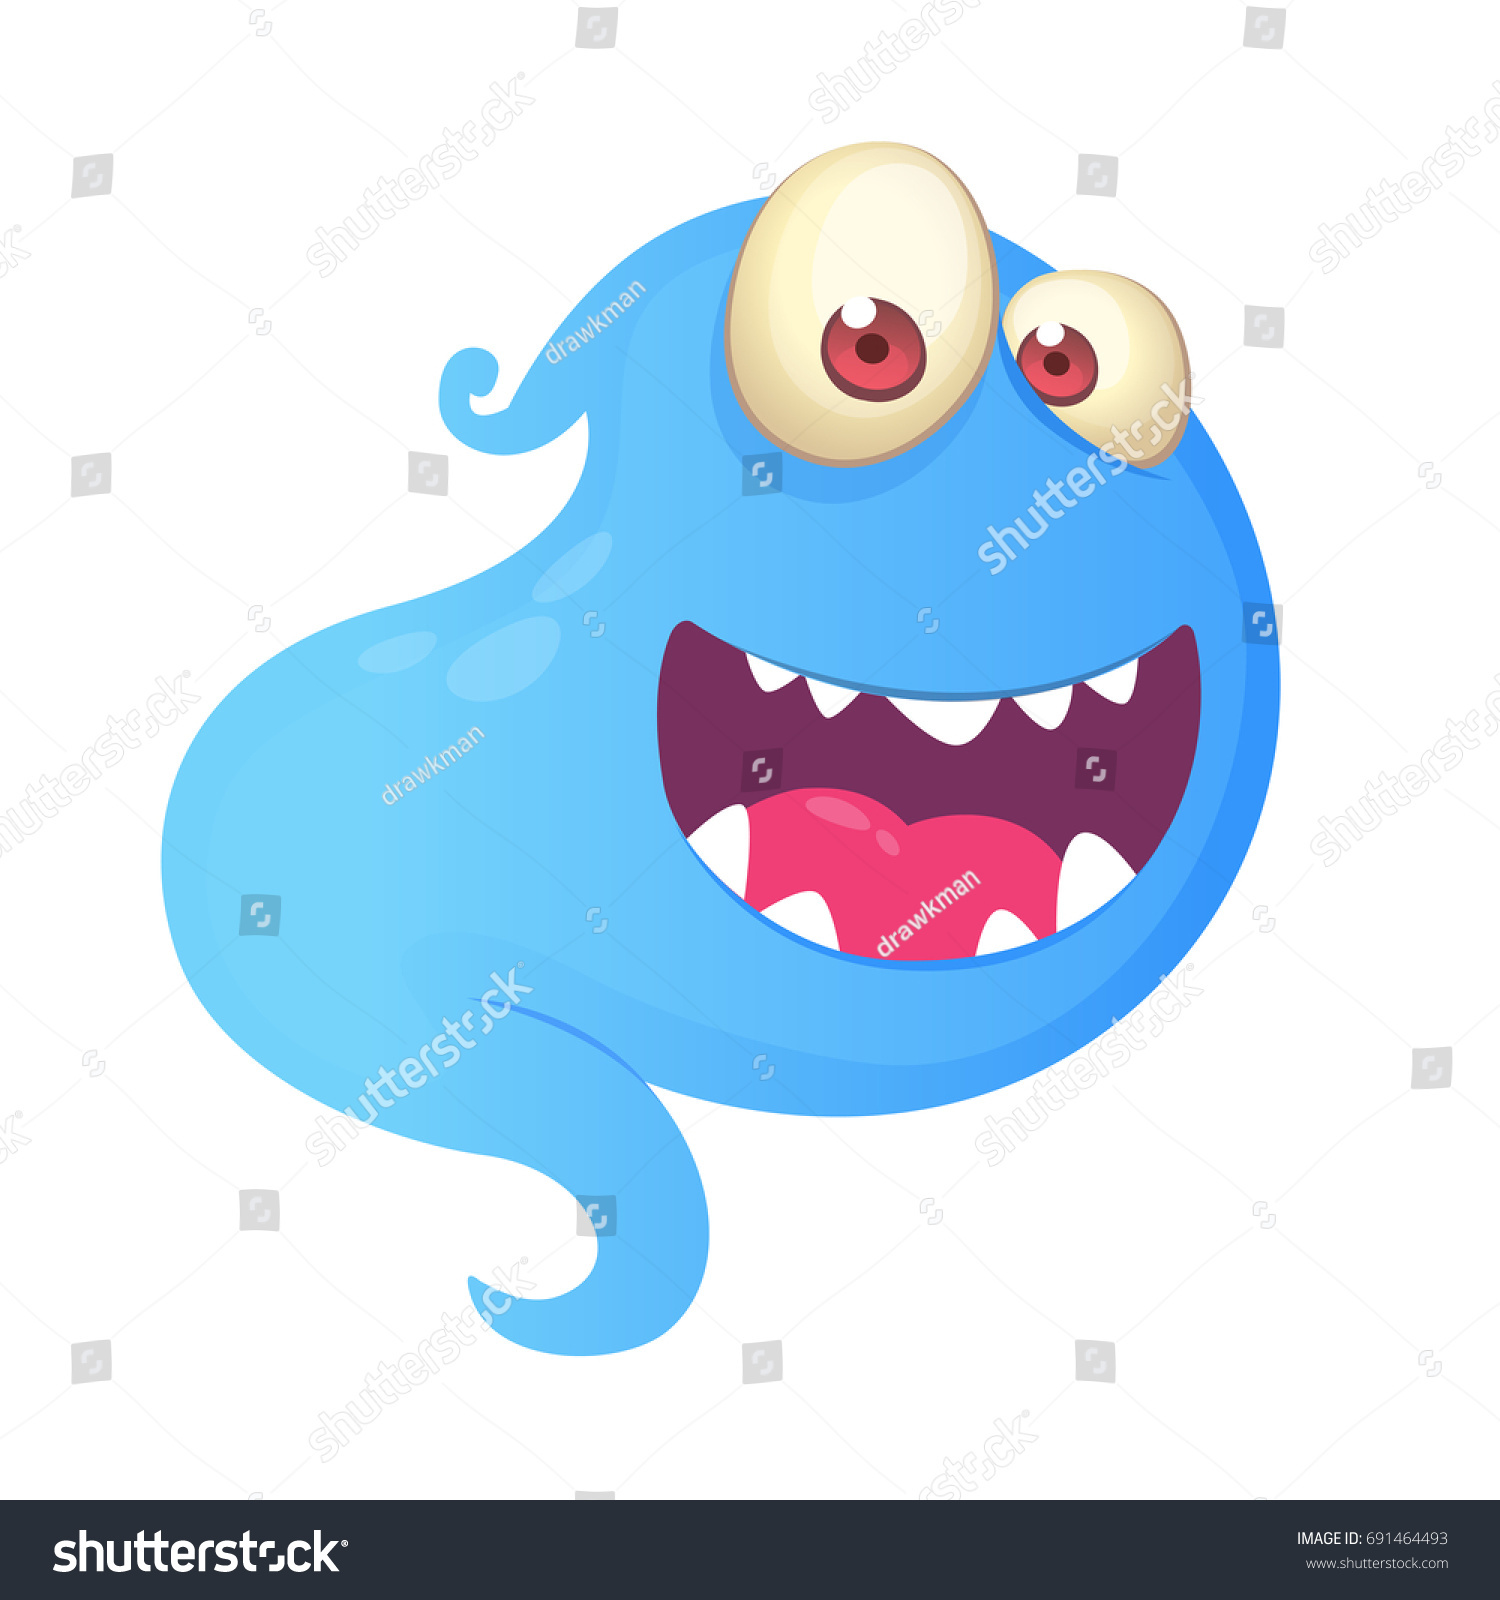 Funny Cartoon Ghost Laughing Vector Blue Stock Vector (Royalty Free ...